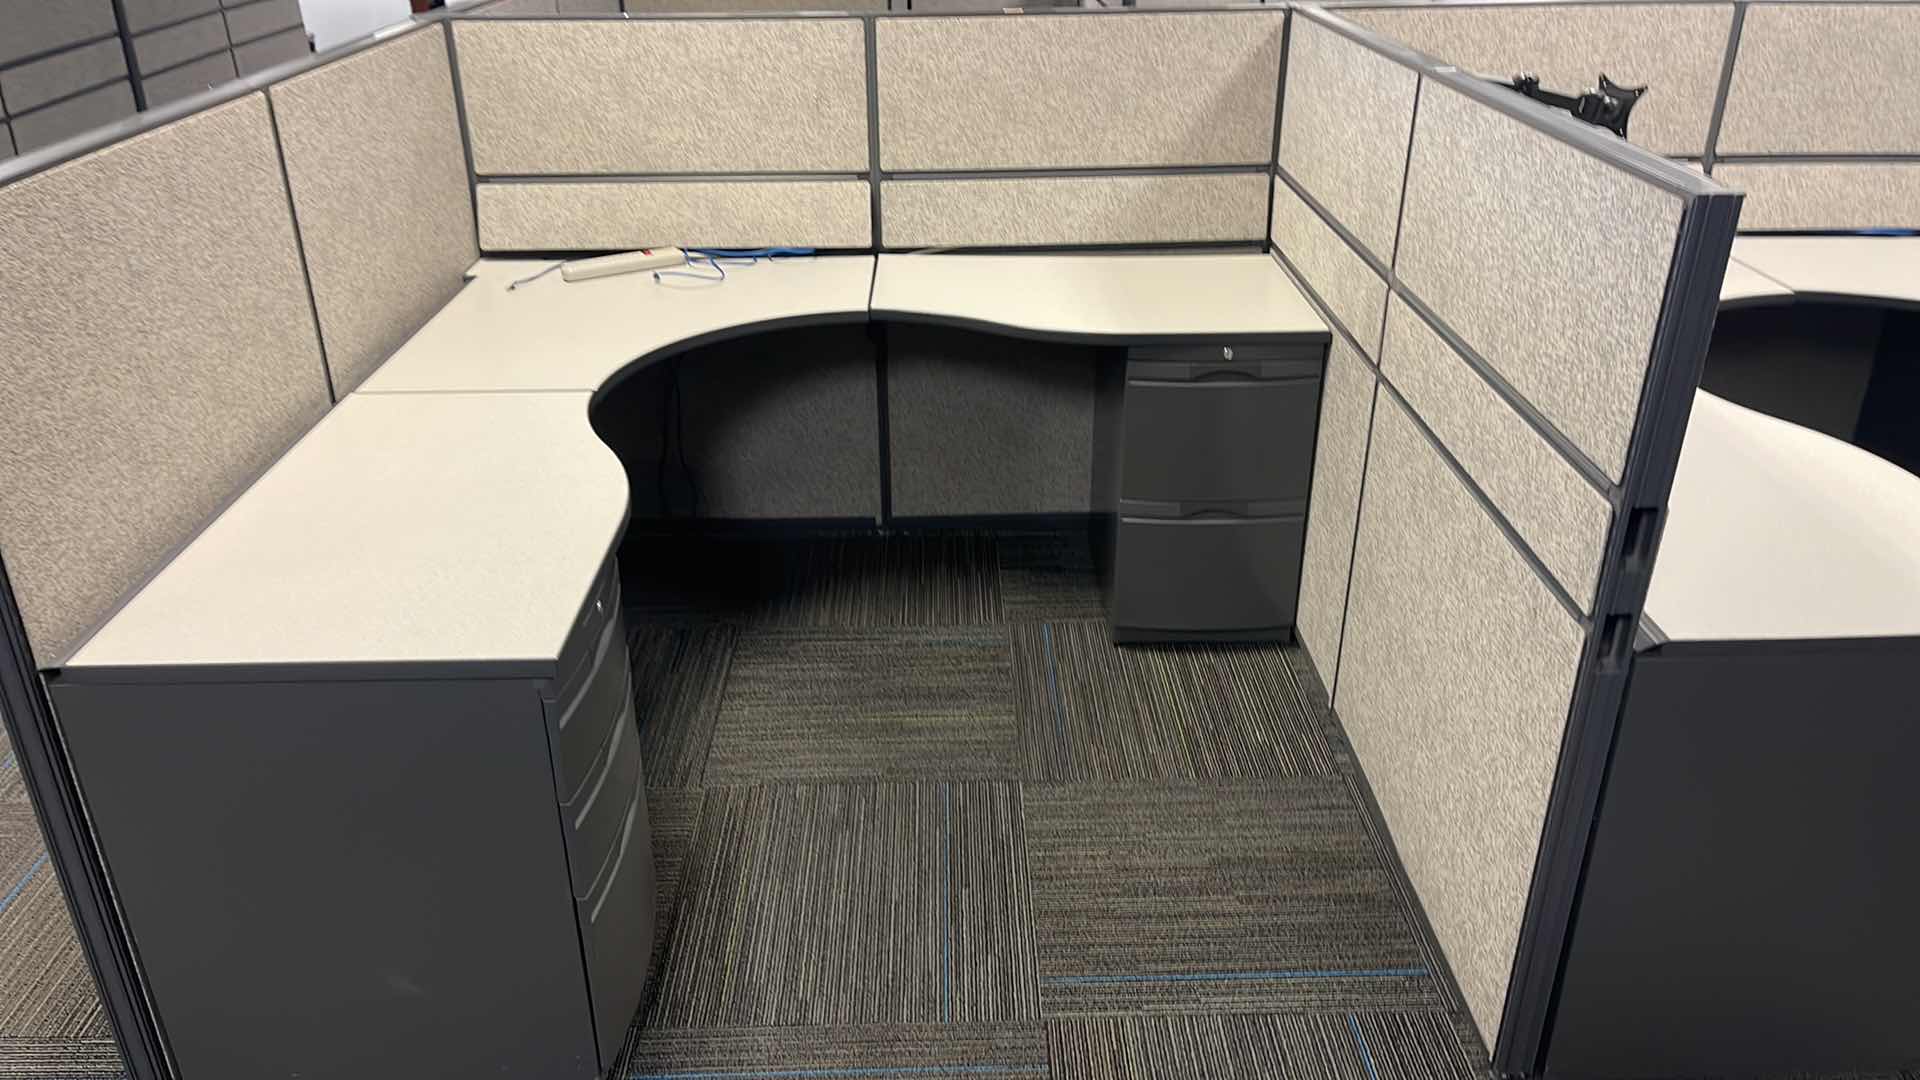 Photo 6 of 3 PC CUBICLE SET W 5 DRAWER MEDAL BASE DESKS 2 CUBICLES 76” X 76” H50” 1 CUBICLE 12’ X 76” H50”(BUYER TO DISASSEMBLE & REMOVE FROM 2ND STORY OFFICE BUILDING W ELEVATOR)